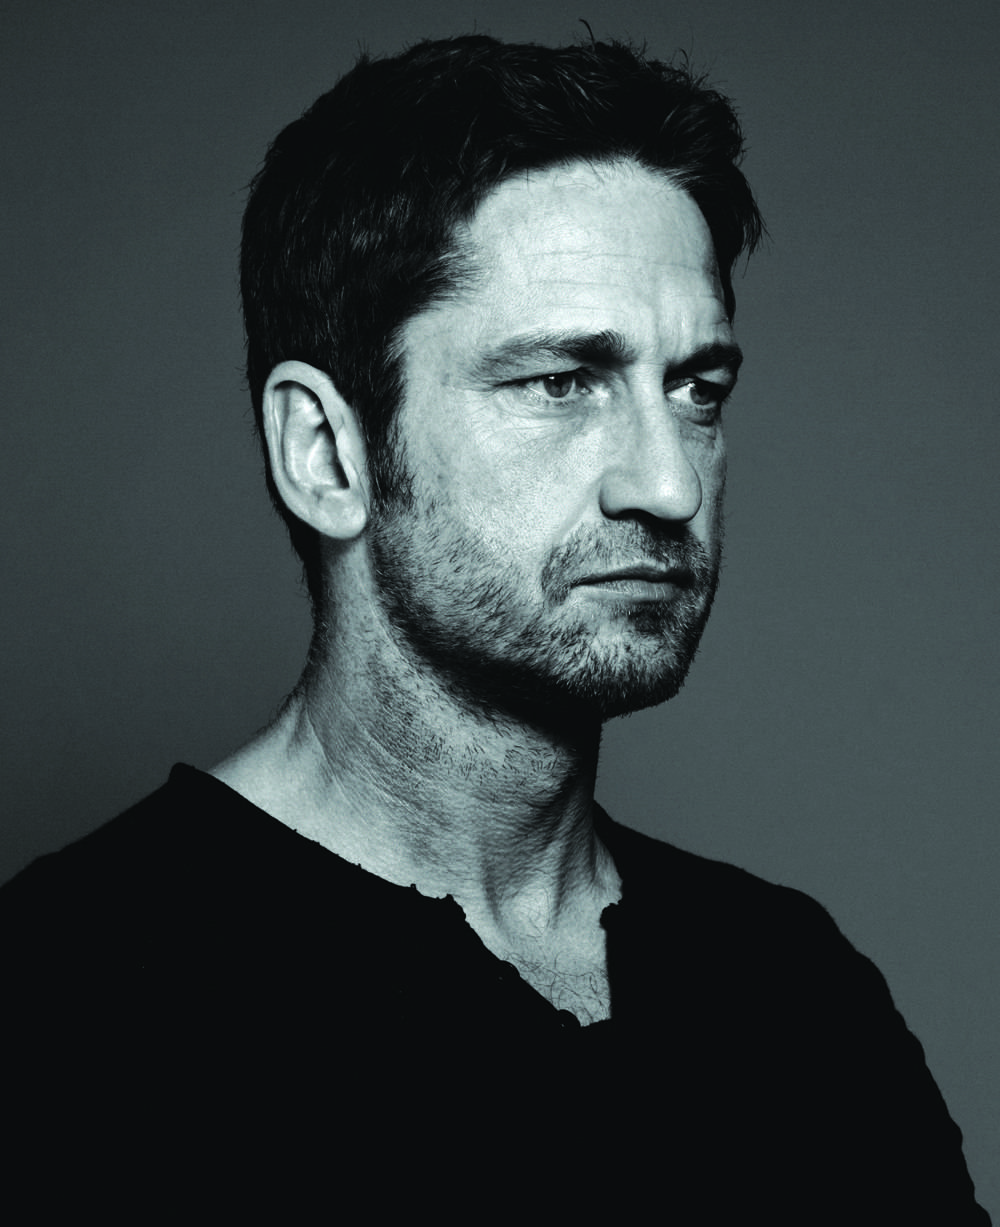 The Week in Review: Gerard Butler Covers Haute Time, Swizz Beatz Debuts Collector Series, the Hottest Watches for Vegas and More…